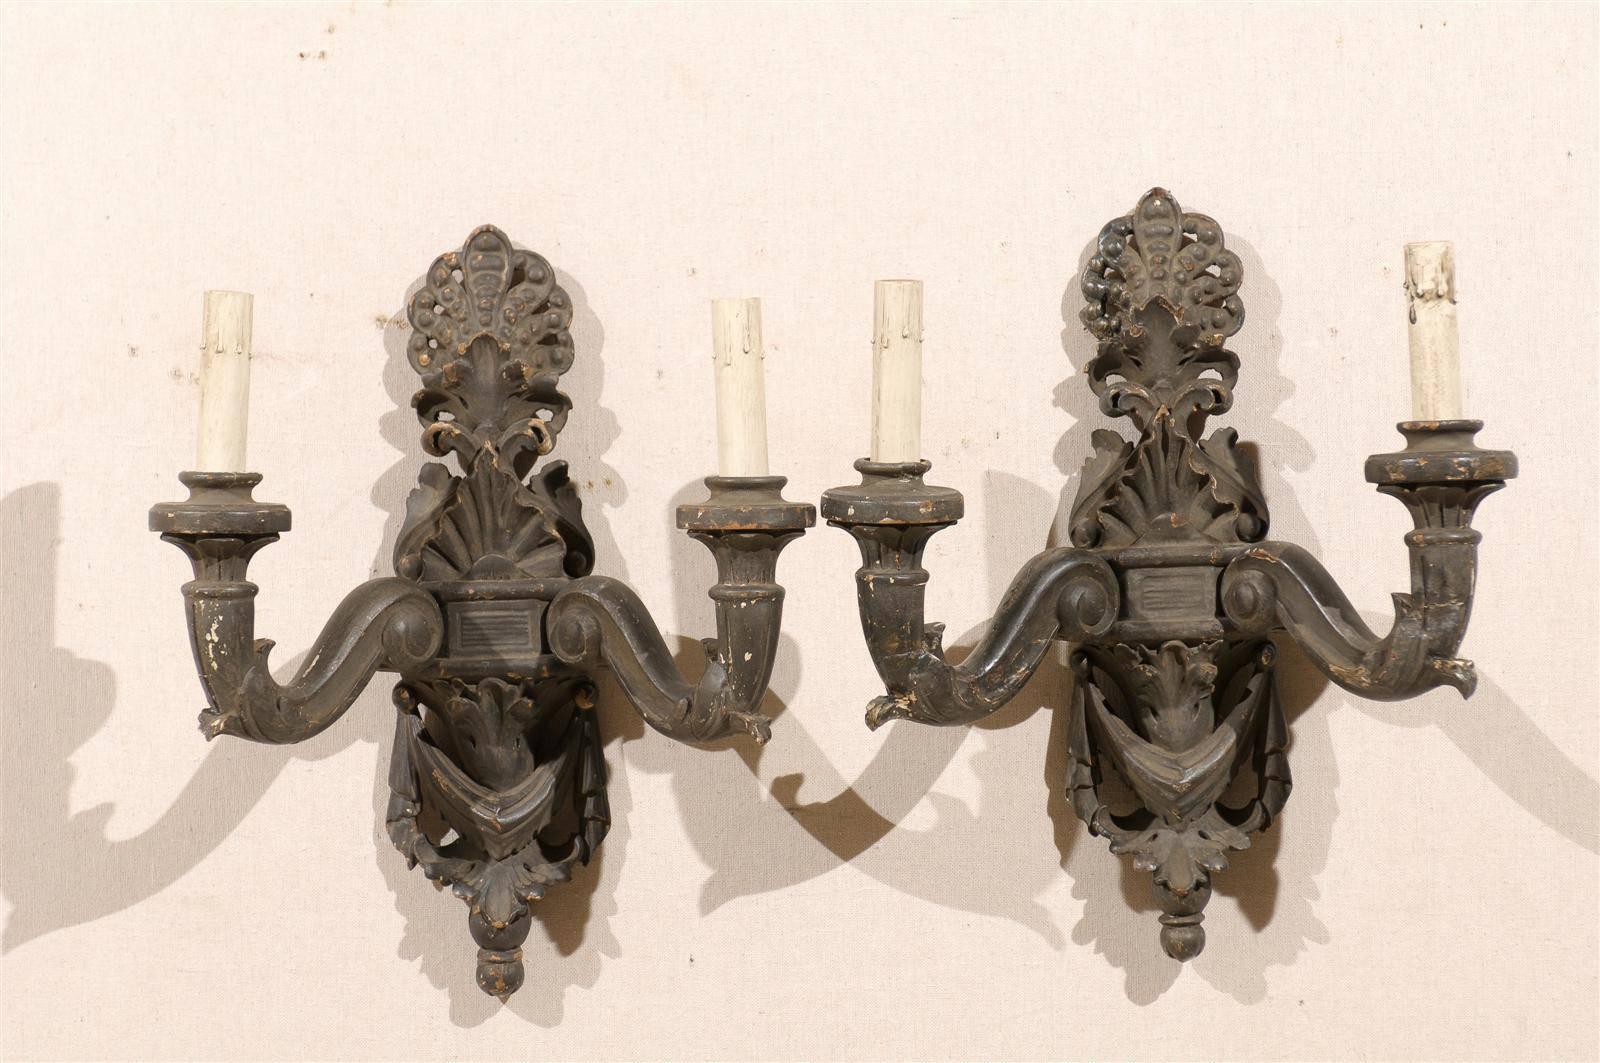 A pair of Italian two-light carved wood sconces with paint over Gesso, richly carved crest, scrolled arms and swag motif, early 20th century. Rewired for the US.